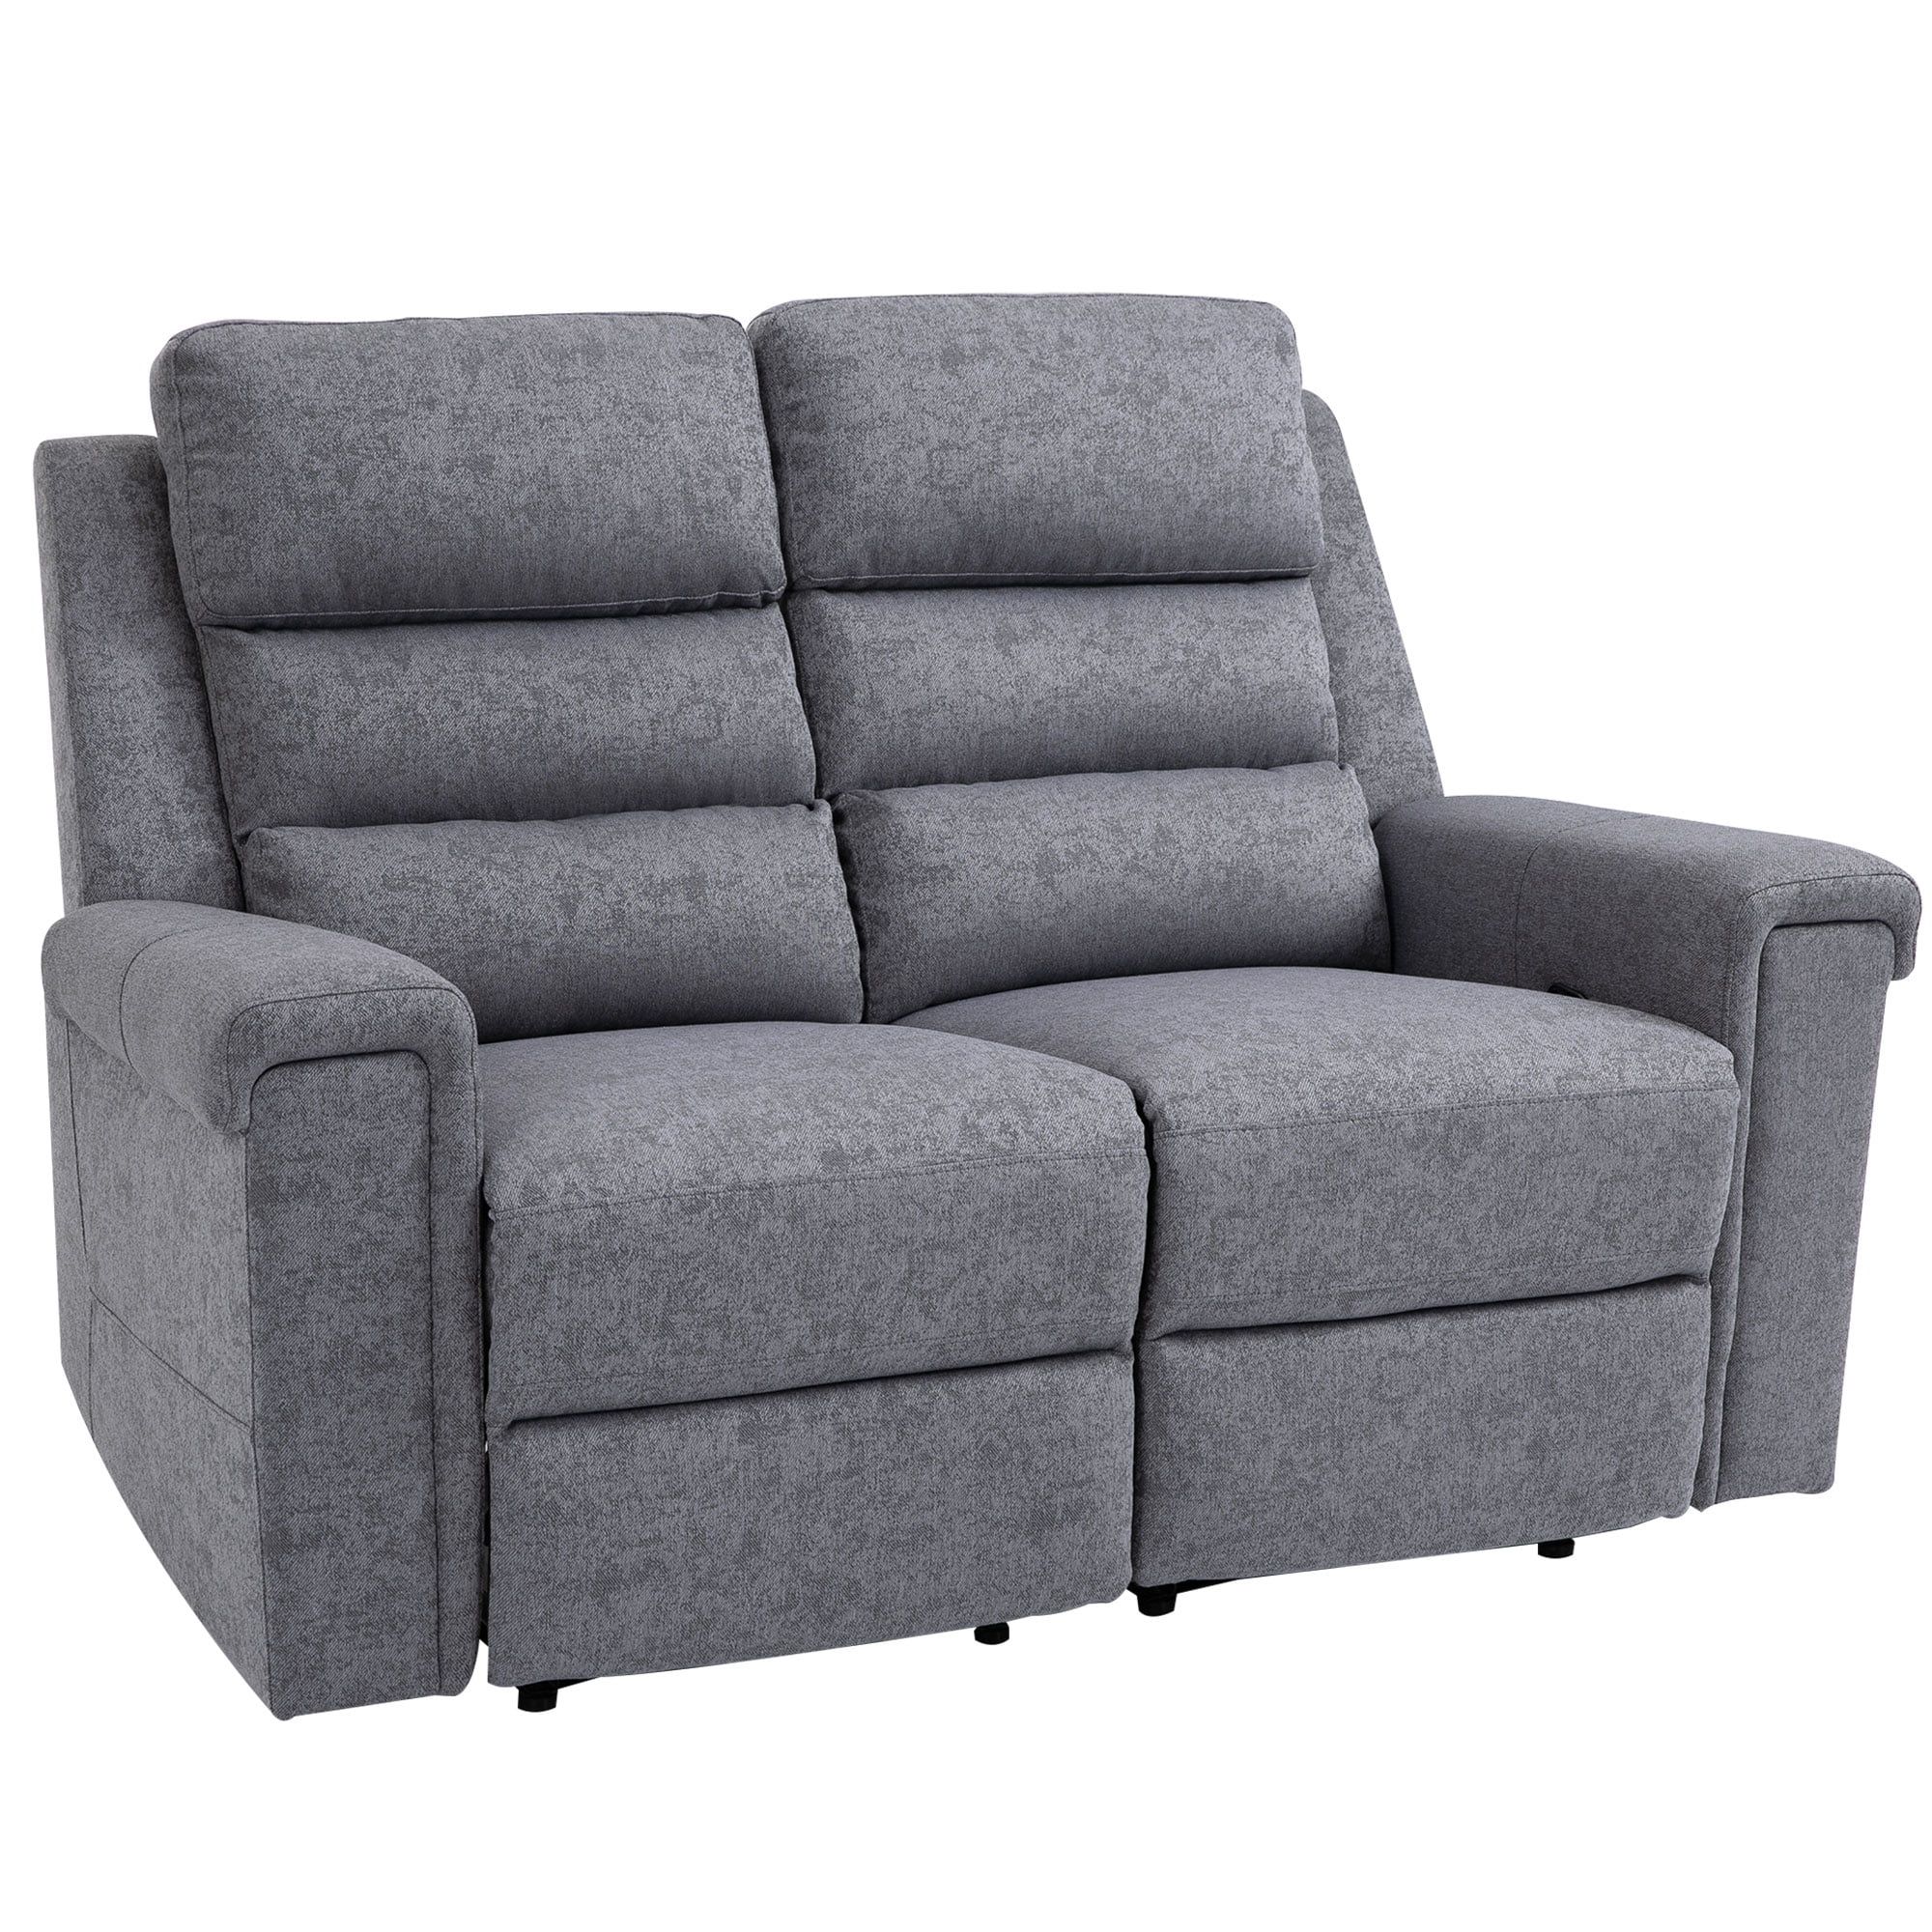 Homcom Modern 2 Seater Manual Reclining Sofa Loveseat Couch With Linen Throughout Modern Light Grey Loveseat Sofas (View 17 of 20)